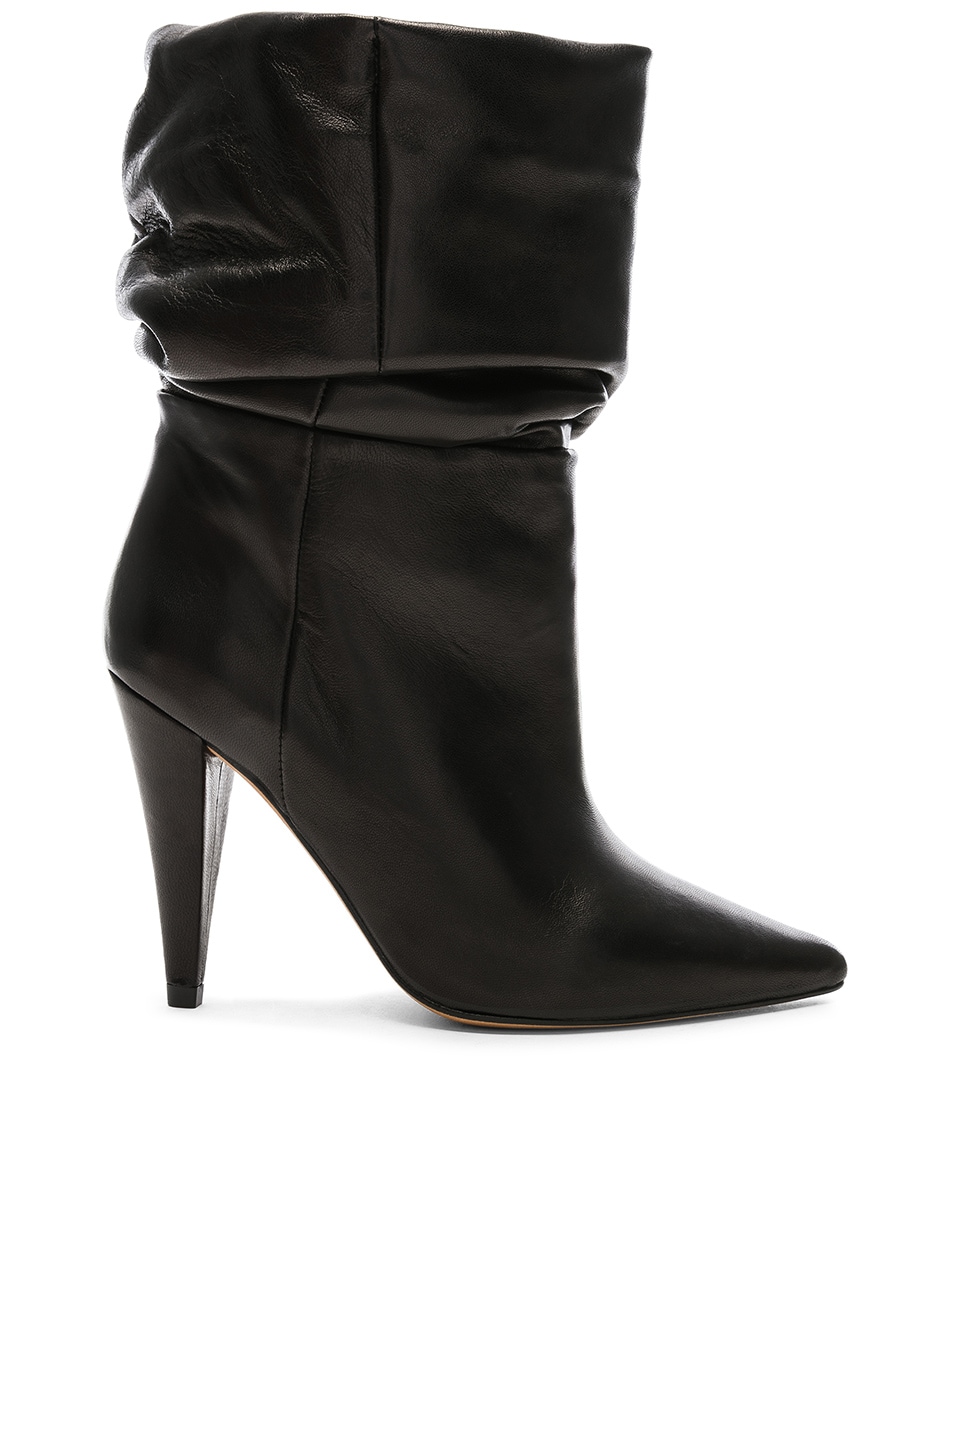 IRO Leather Bergula Ankle Boots in Black | FWRD